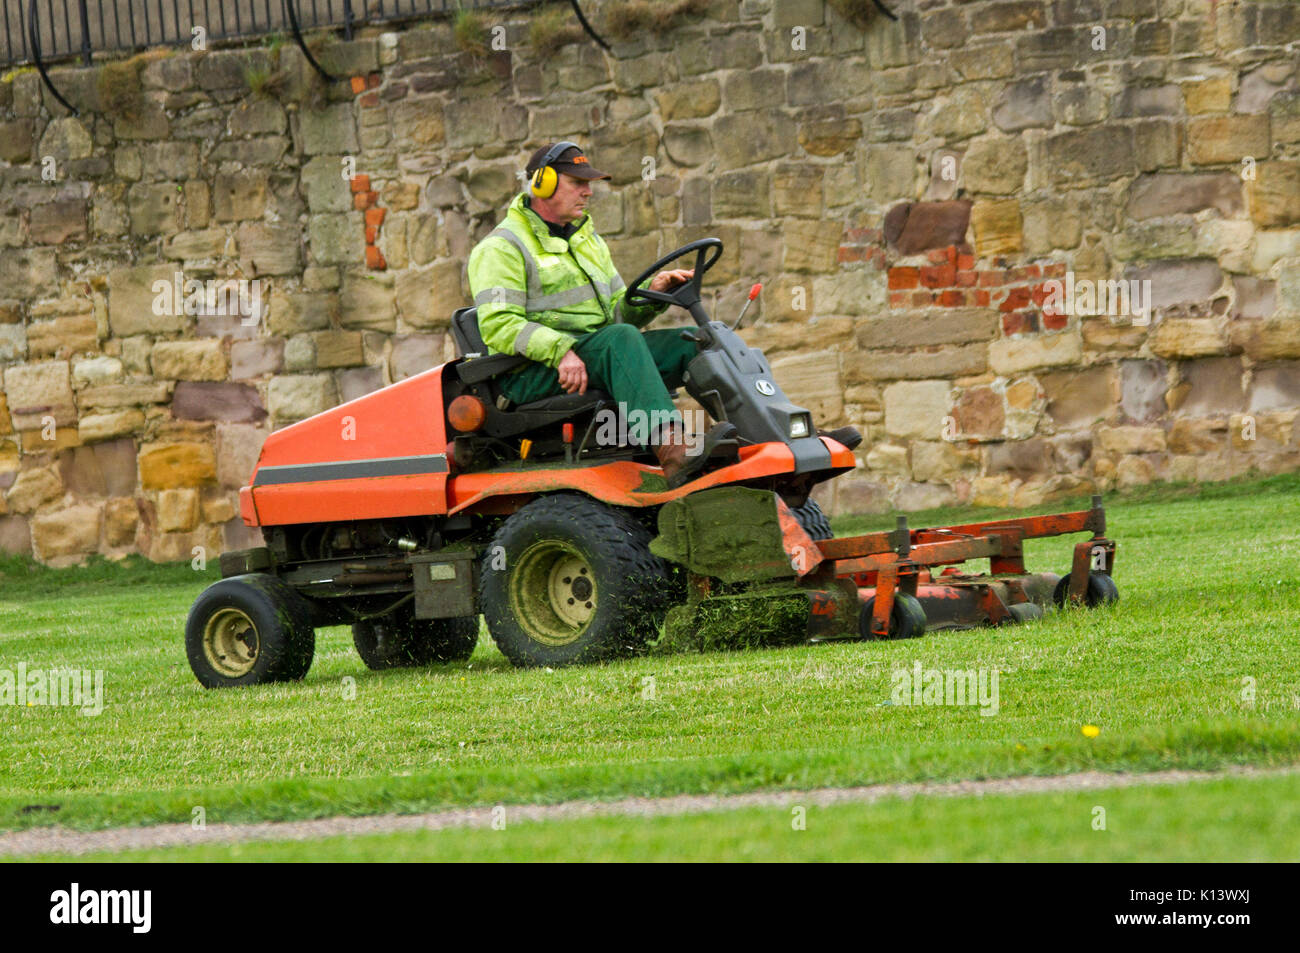 Man wearing high visibility clothing & ear protection using large ride-on mower to cut grass of lawn in public park Stock Photo